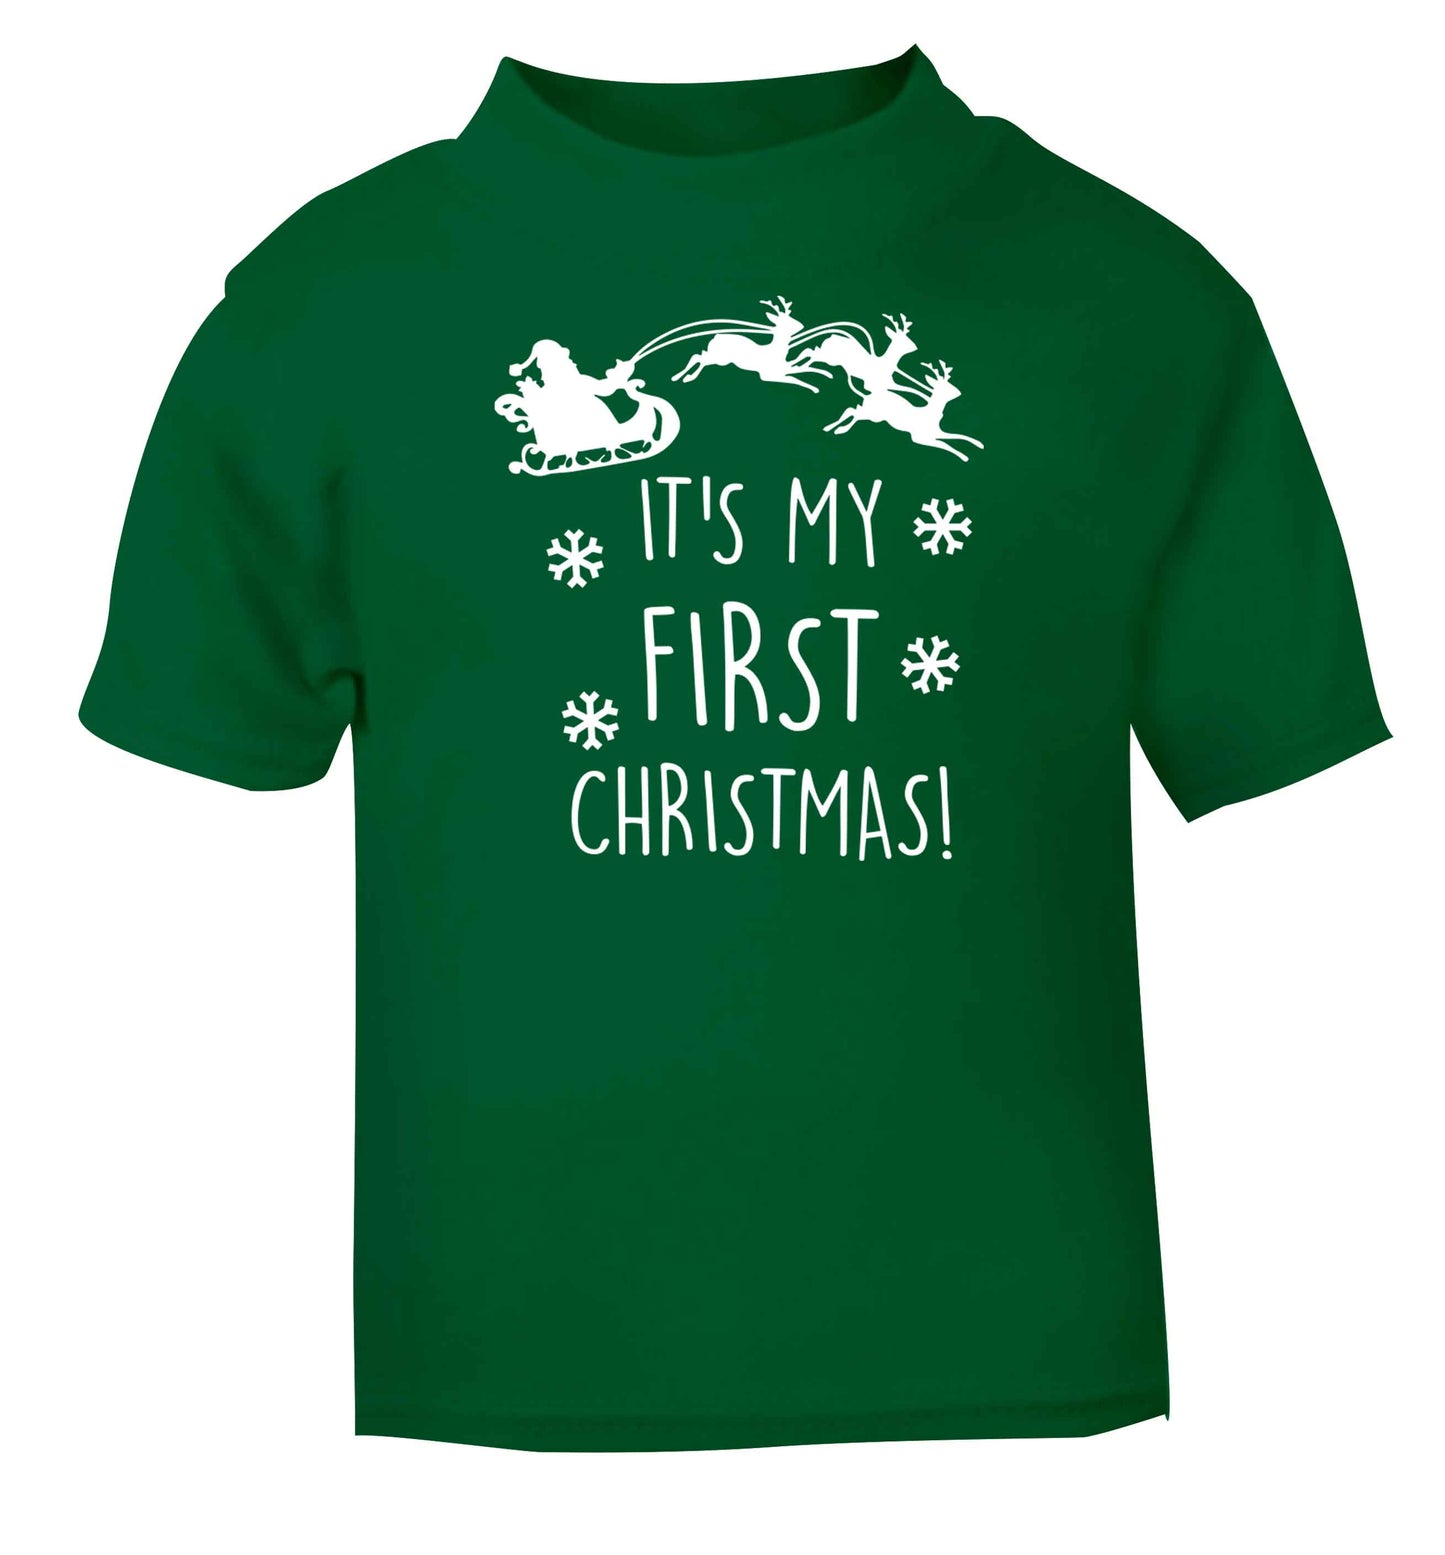 It's my first Christmas - Santa sleigh text green baby toddler Tshirt 2 Years